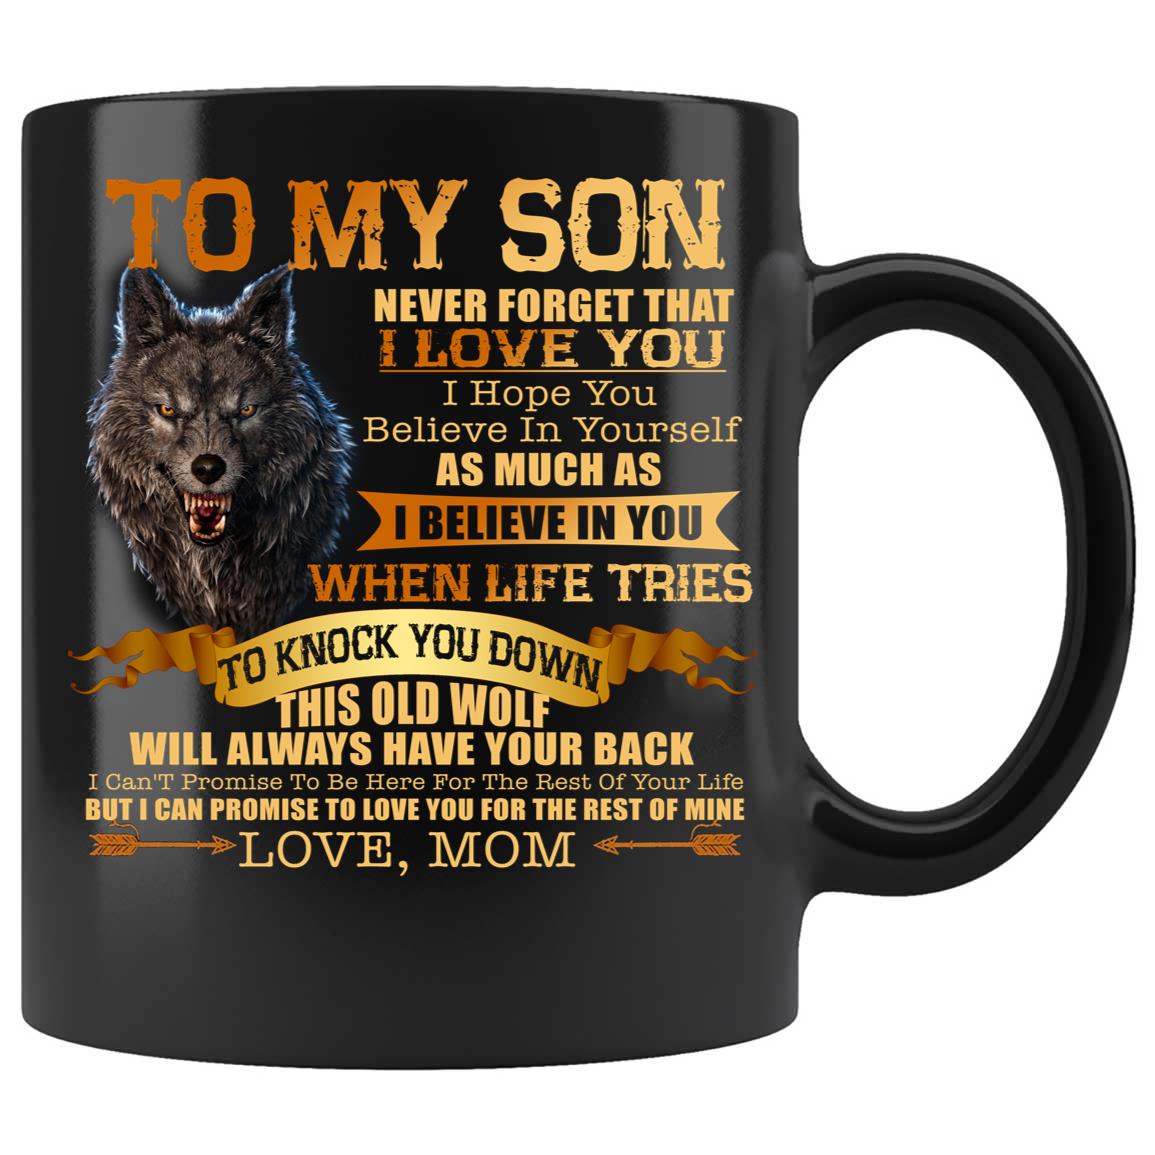 Skitongifts Funny Ceramic Coffee Mug Novelty M26-Nh181221-Wolf, To My Son From Mom, Never Forget That I Love You Ubogecs